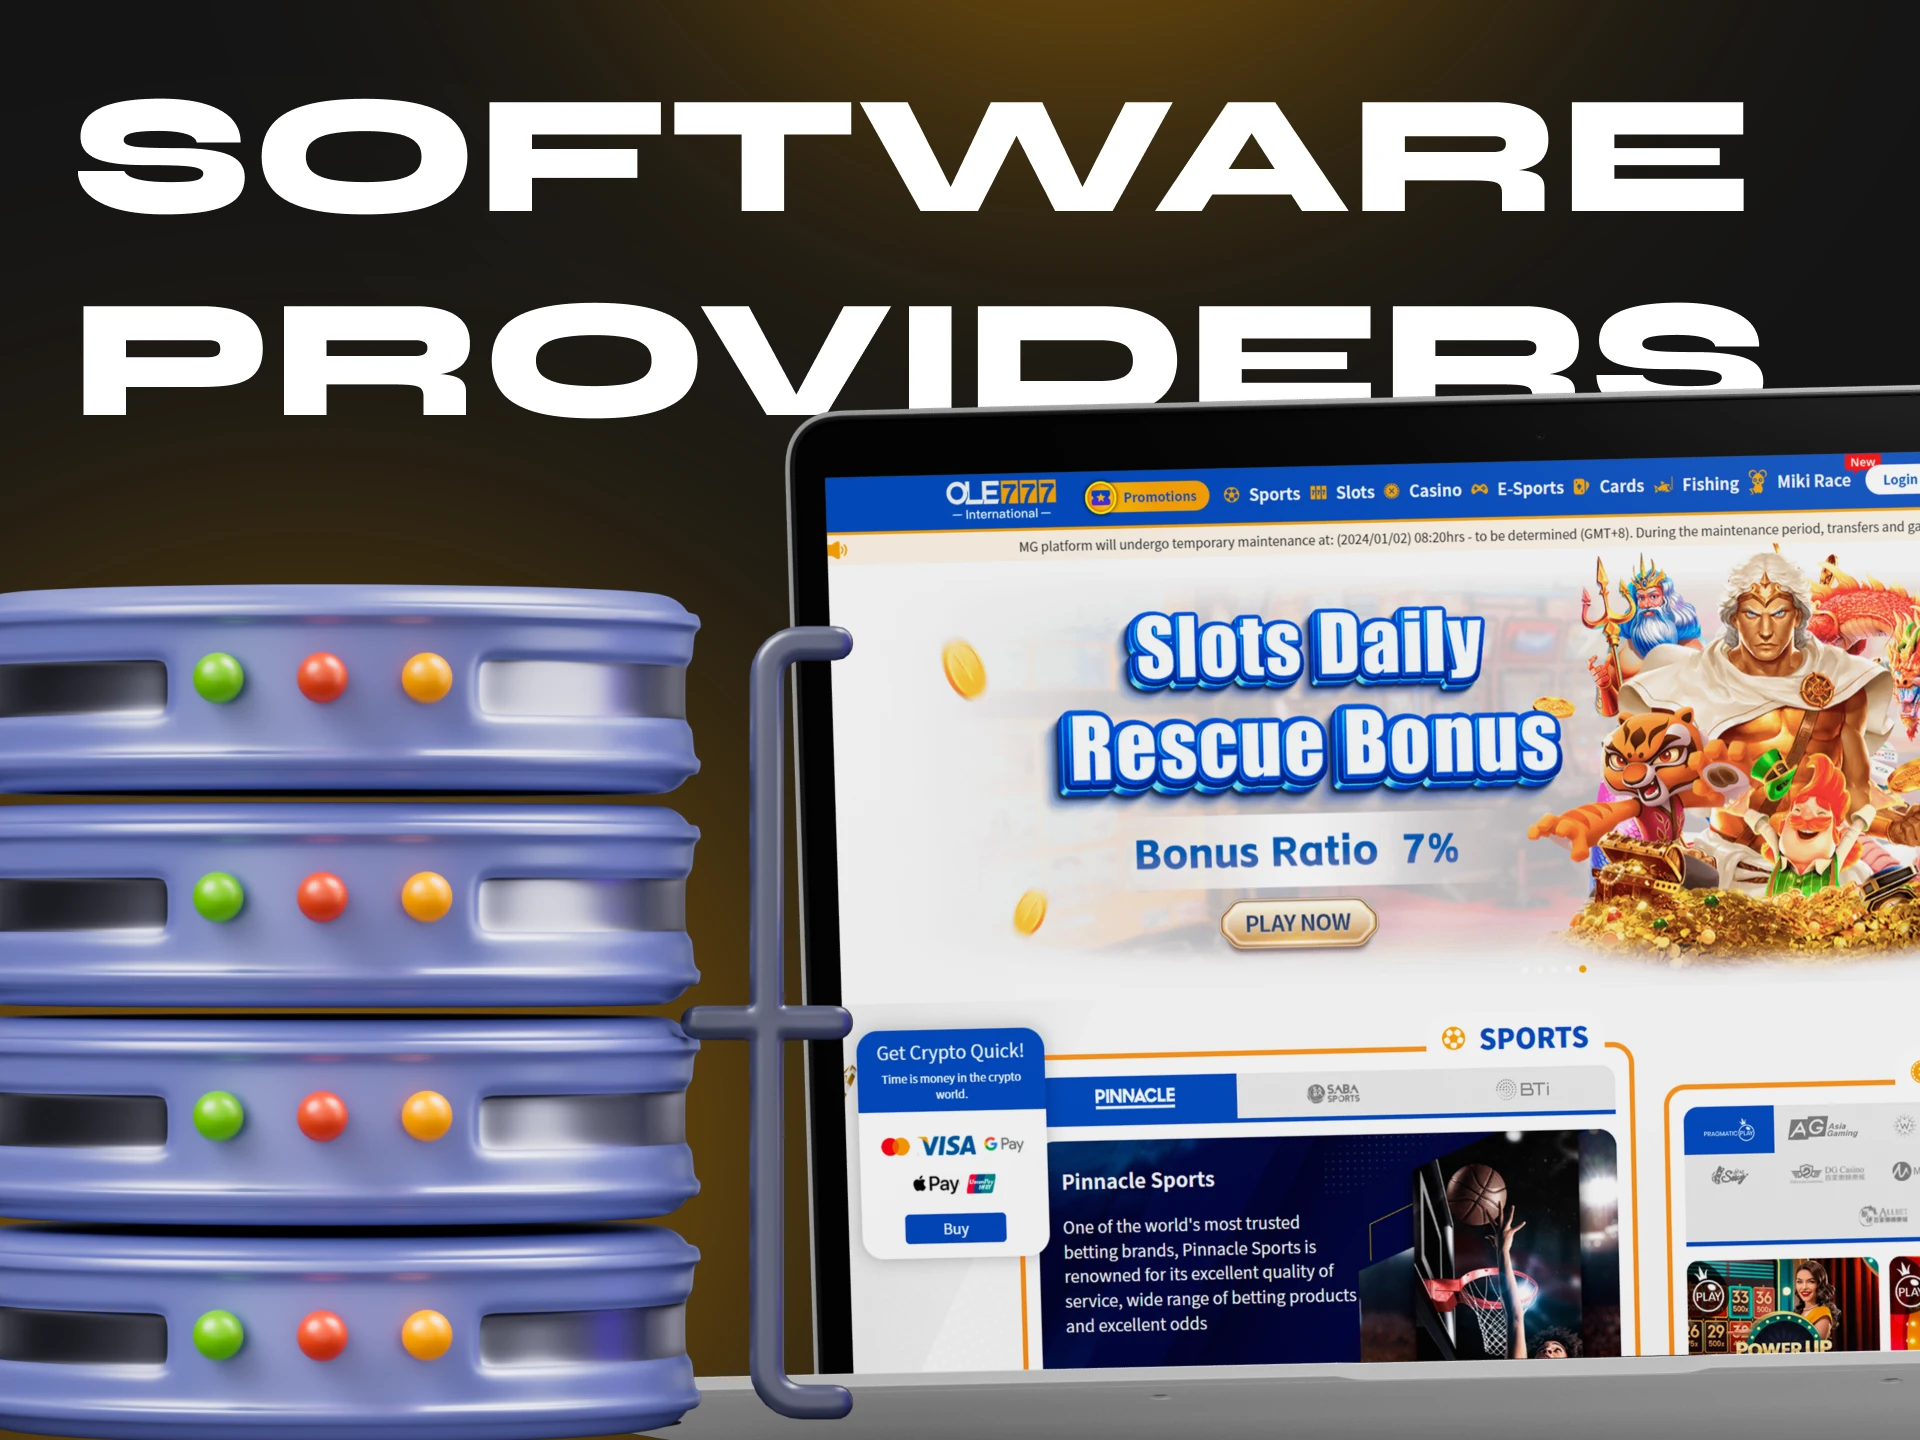 Ole777 casino offers games only from trusted software providers.